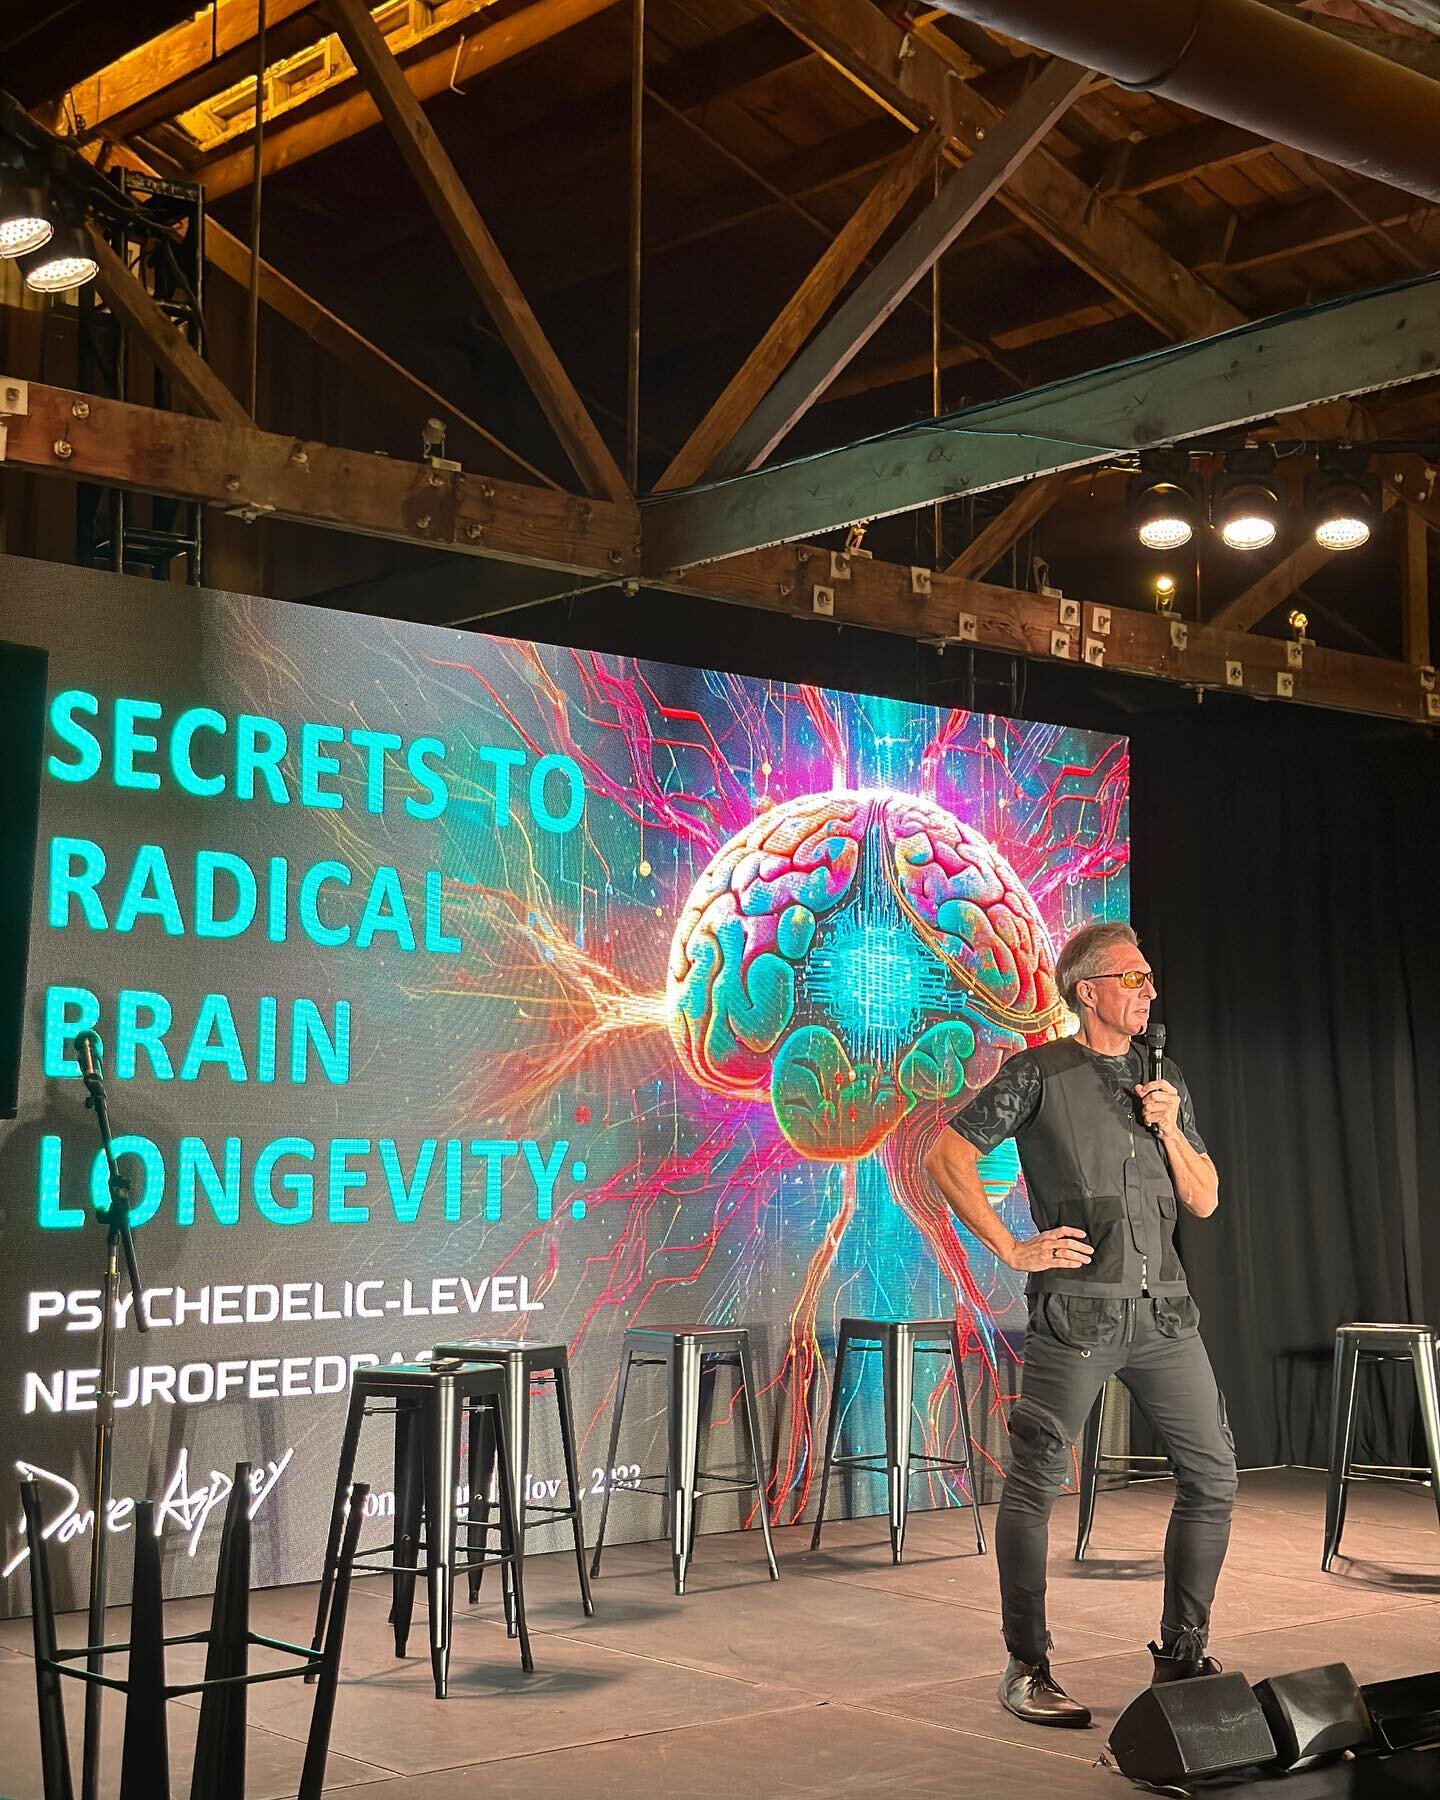 💫 What a whirlwind at the Wonderland Conference! Talk about a weekend of mind-altering insights and magic 🍄✨

🤝 Networking? Oh, you mean charm swapping with the who's who of the psychedelics and health optimization world. 💥🧠

📚 The sessions? 🤯